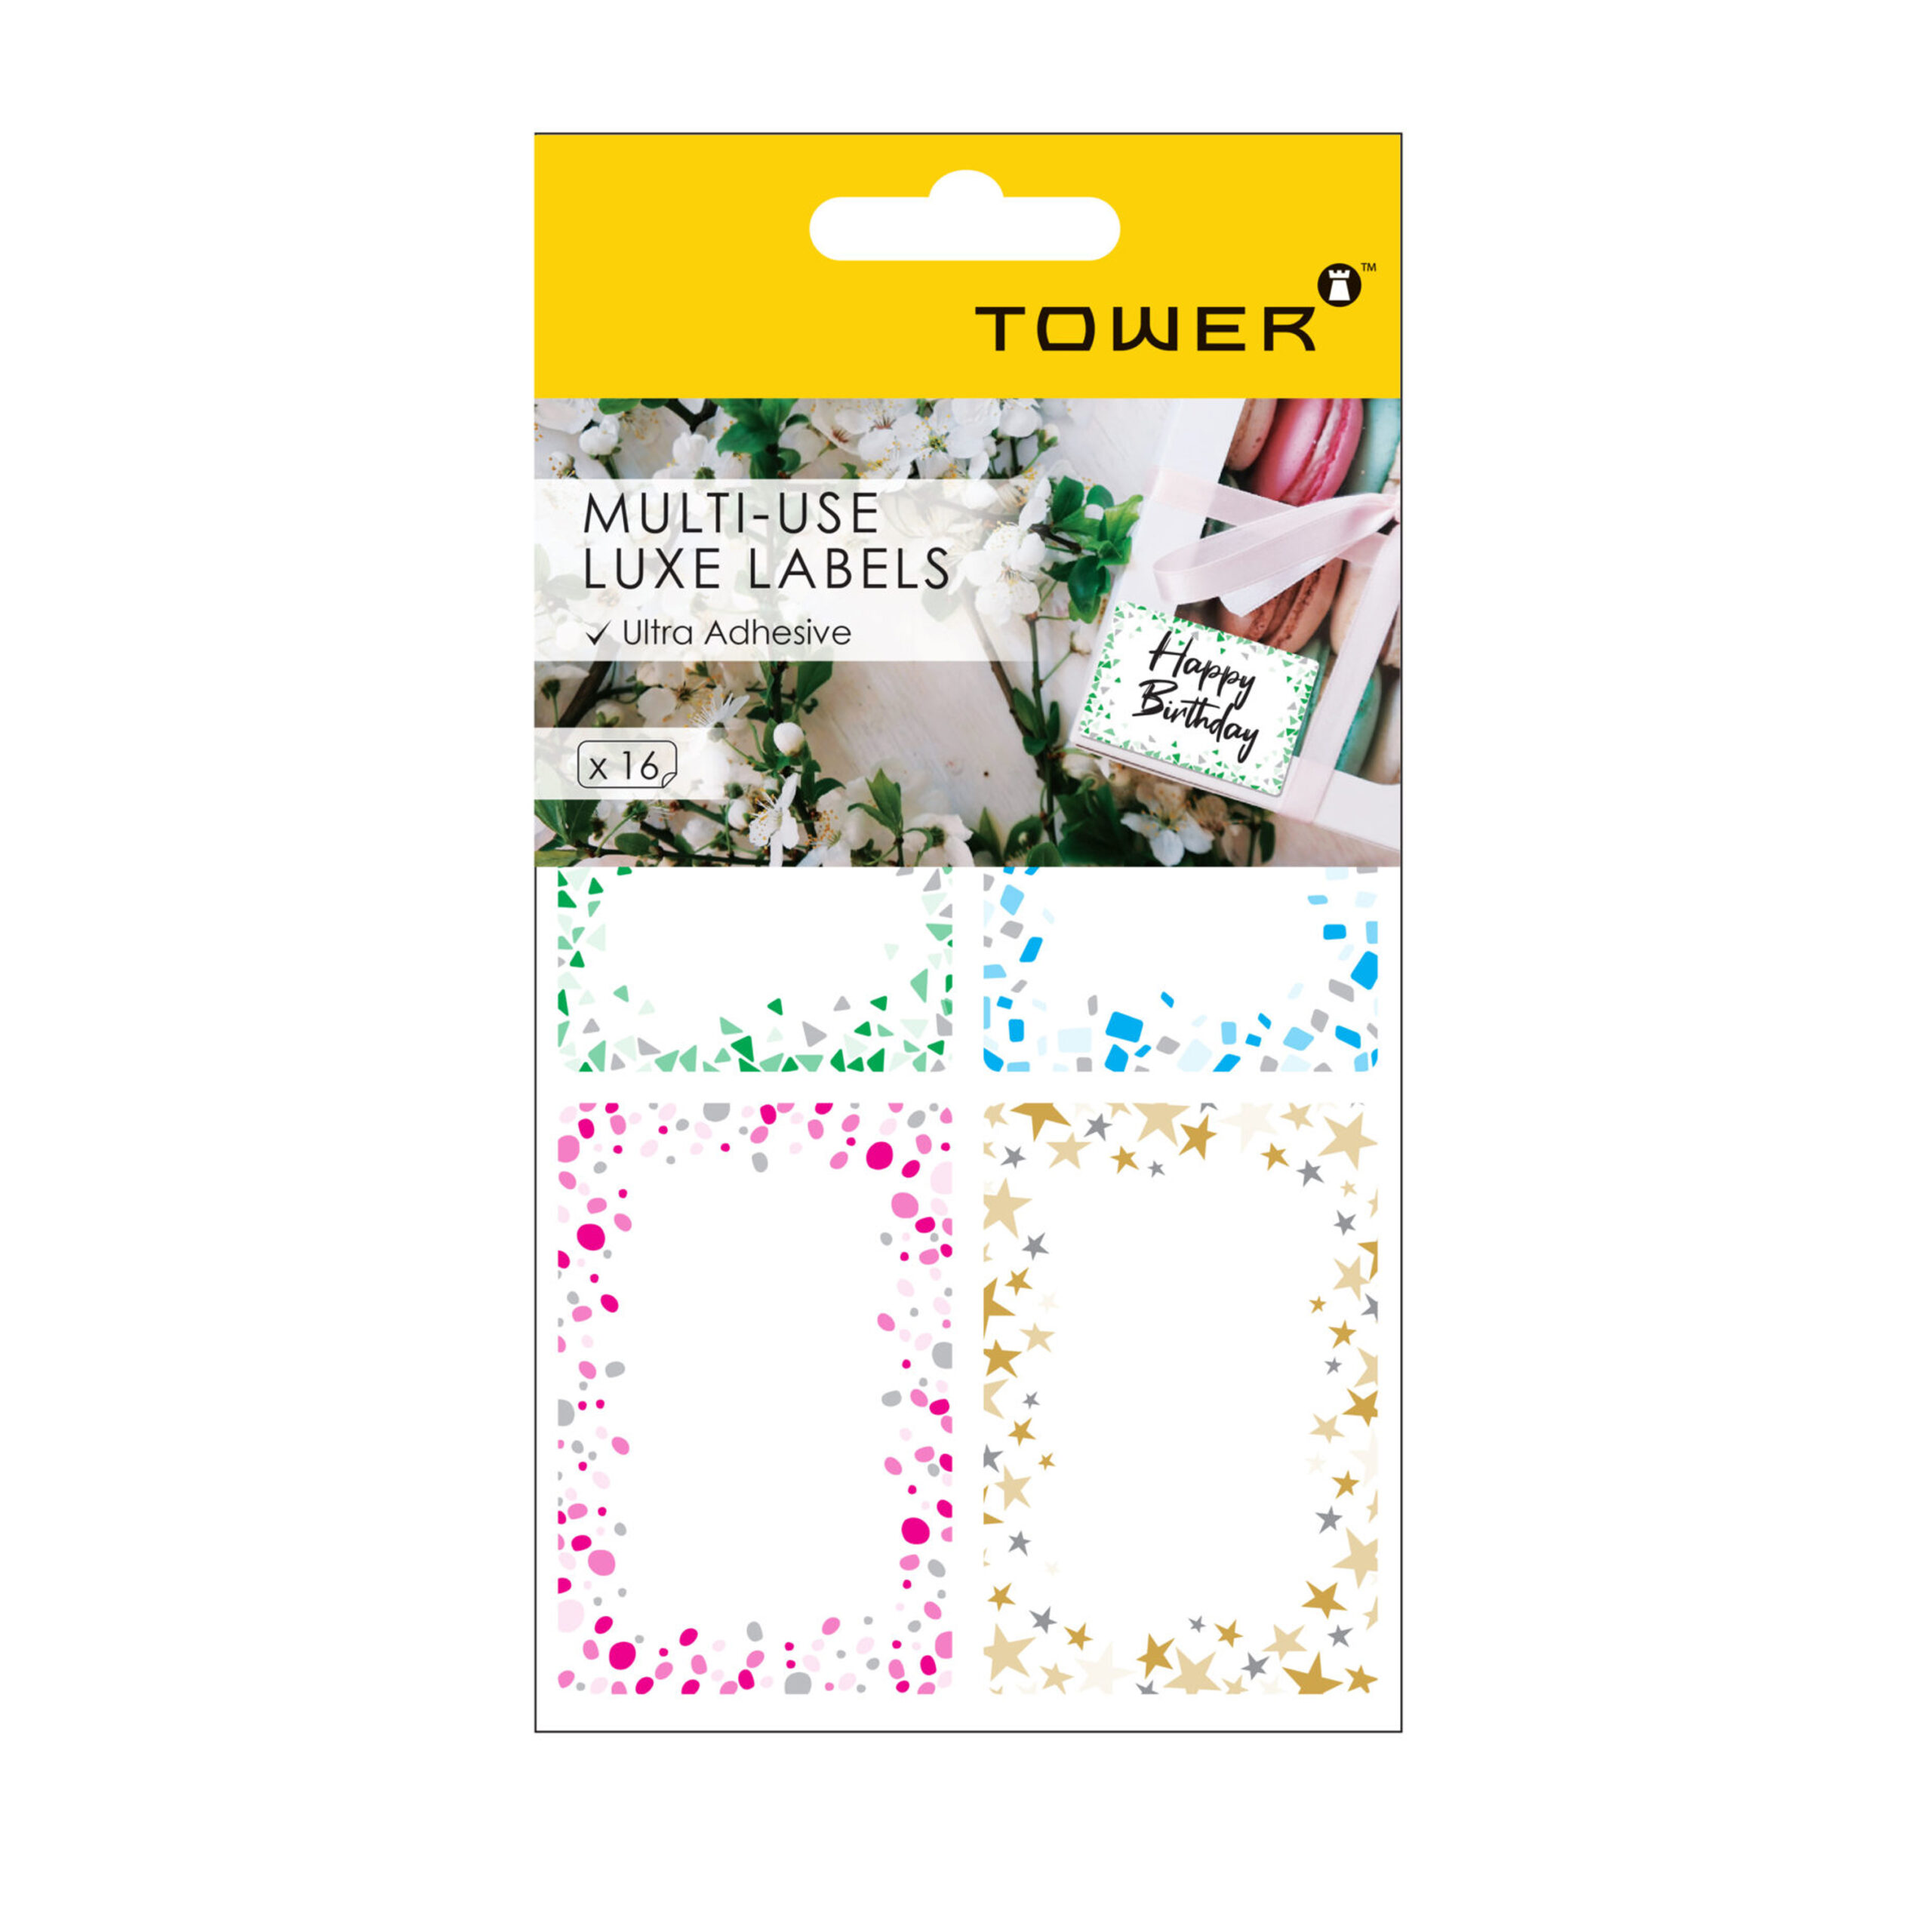 TOWER  ULTRA
ADHESIVE MULTI
USE LABELS  (16
LABELS)